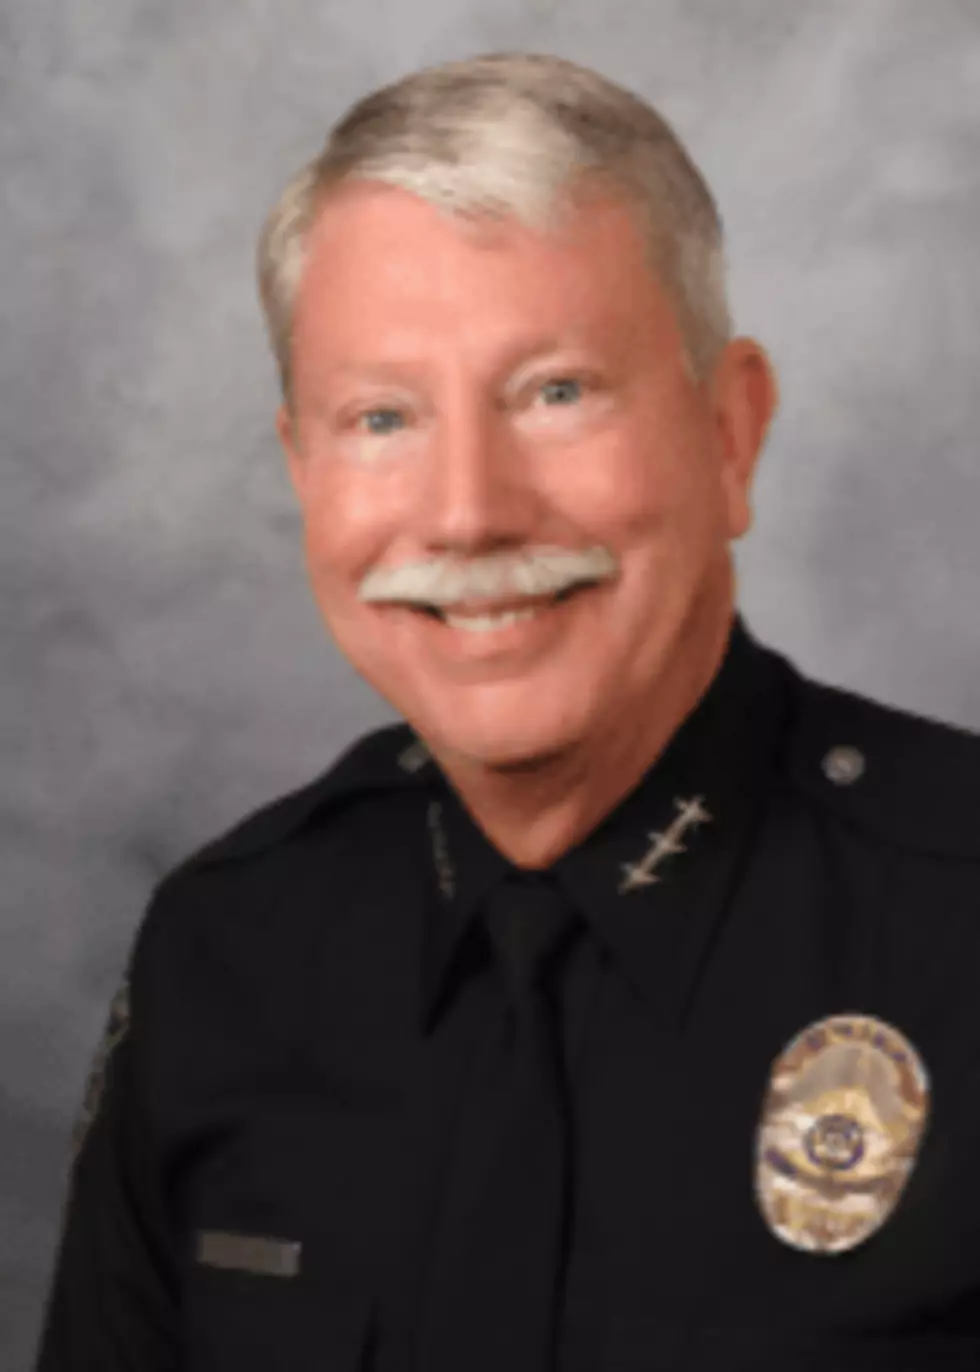 KPD Chief Hohenberg to resign Feb. 2022